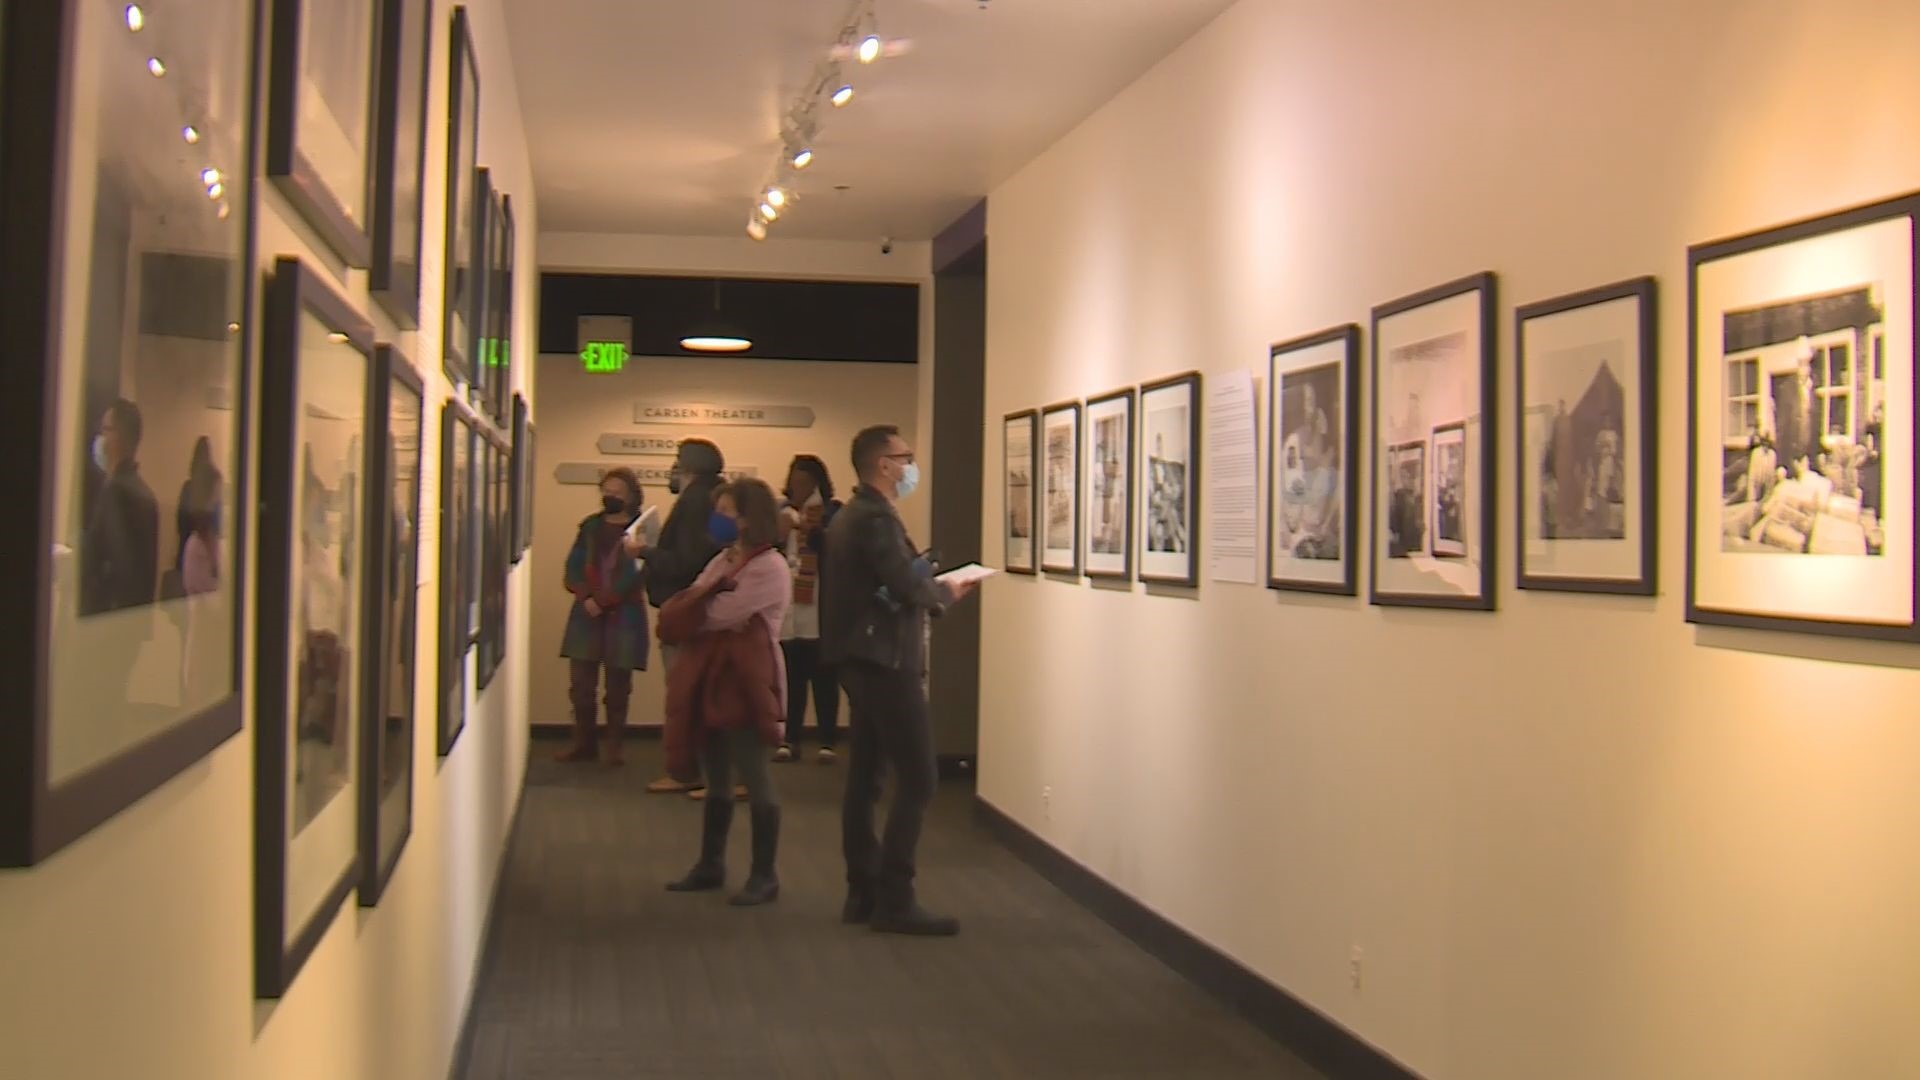 More than 100 photographs by Ernest Withers are on display at the Dairy Arts Center.